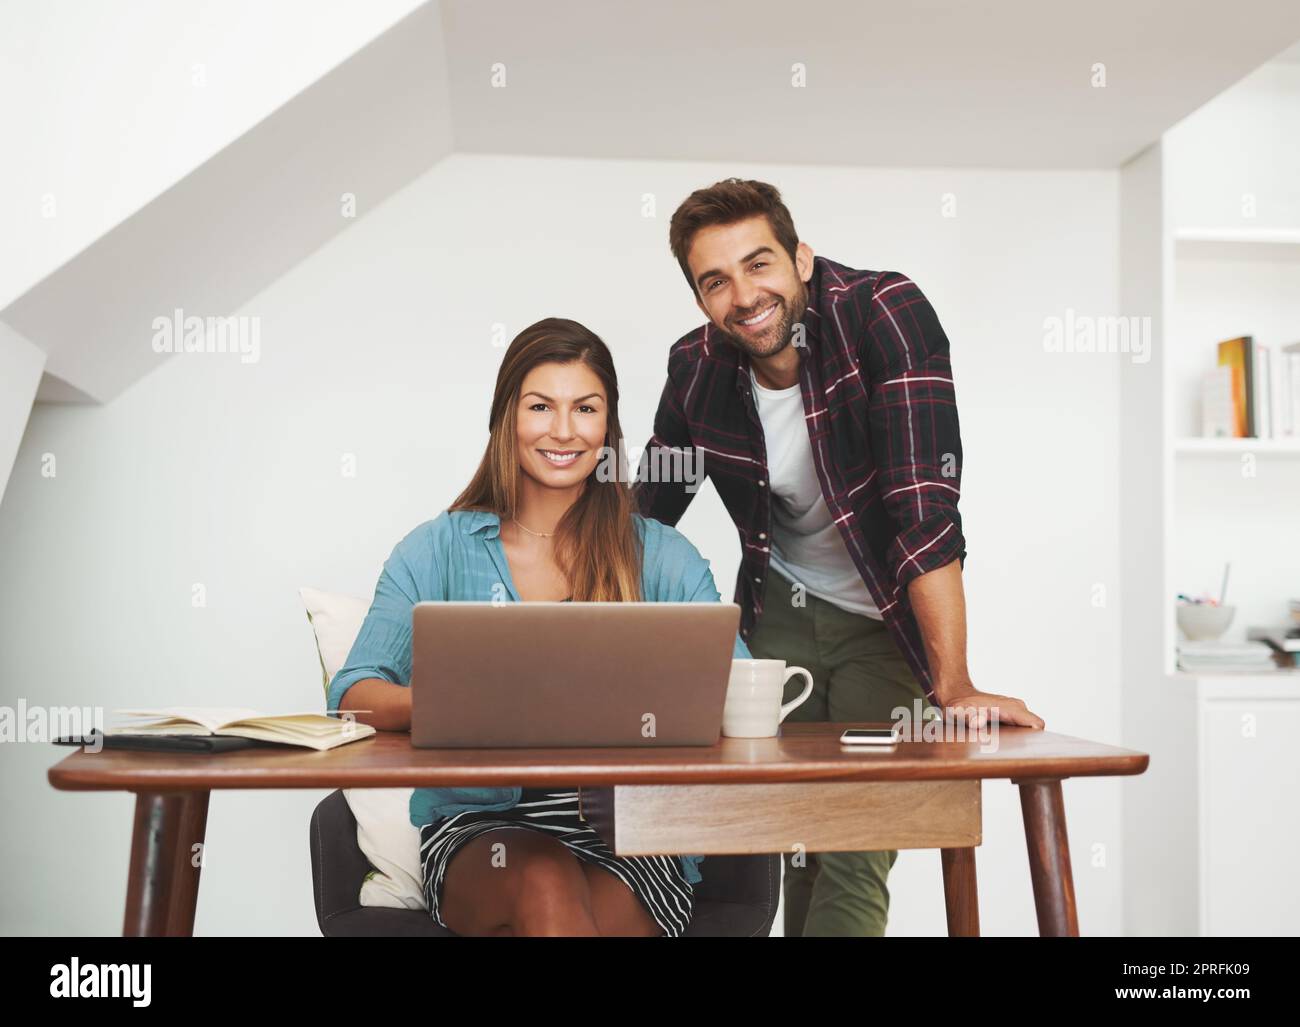 Why would we want to work anywhere else. Portrait of a happy couple of entrepreneurs working together from their home office. Stock Photo